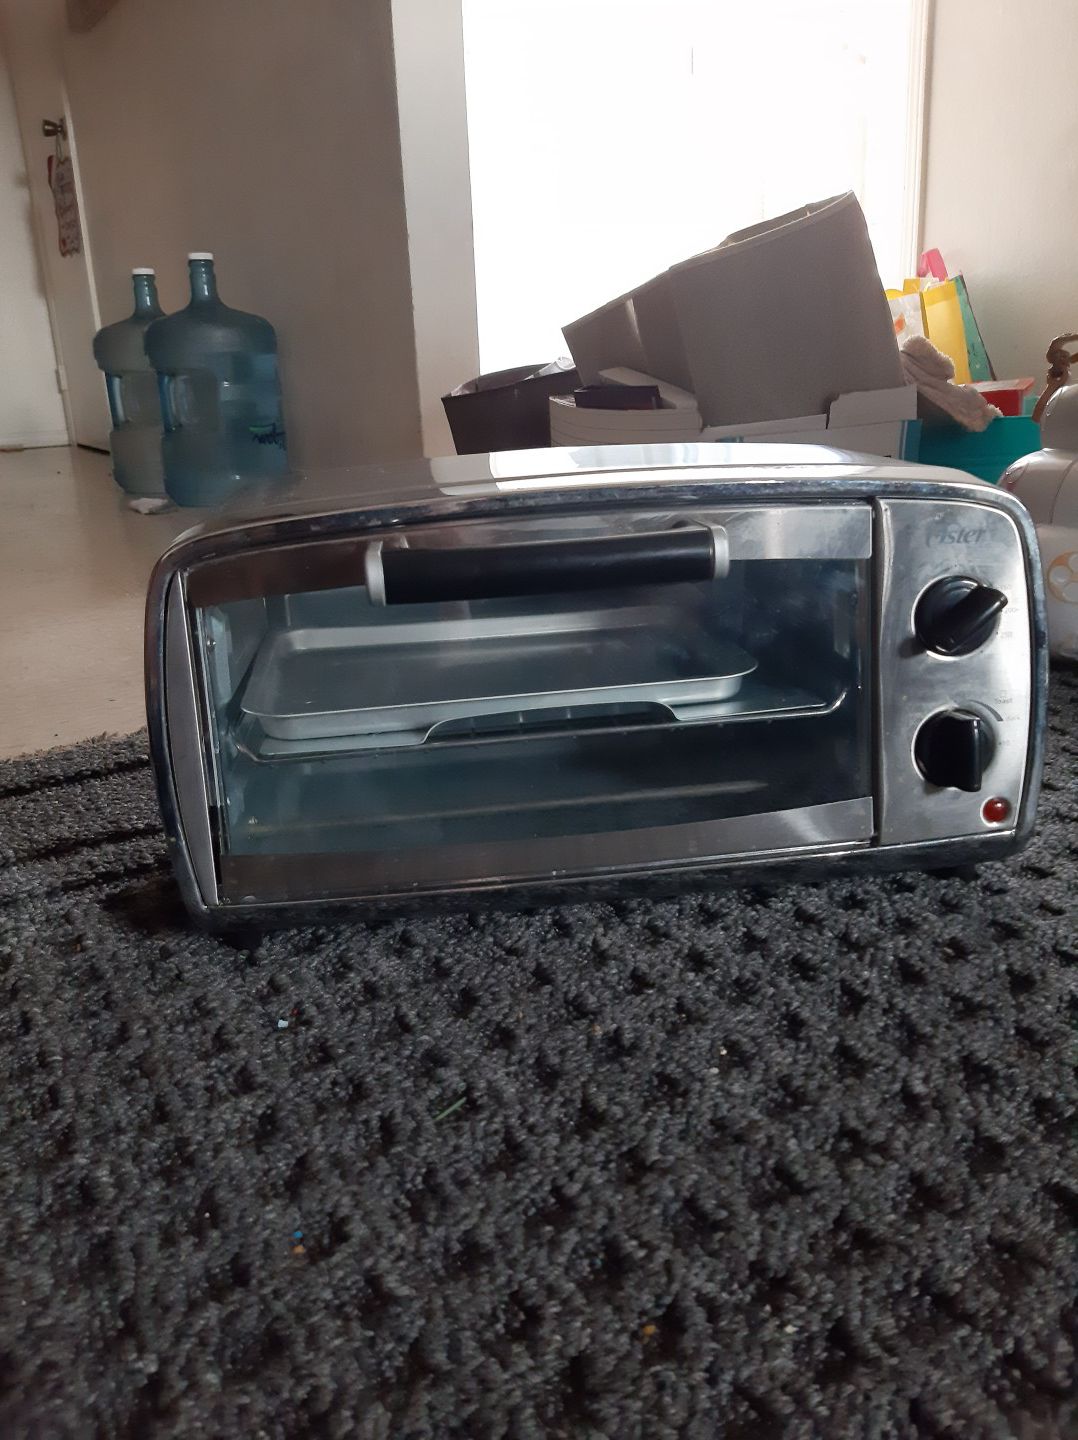 Oster toaster oven